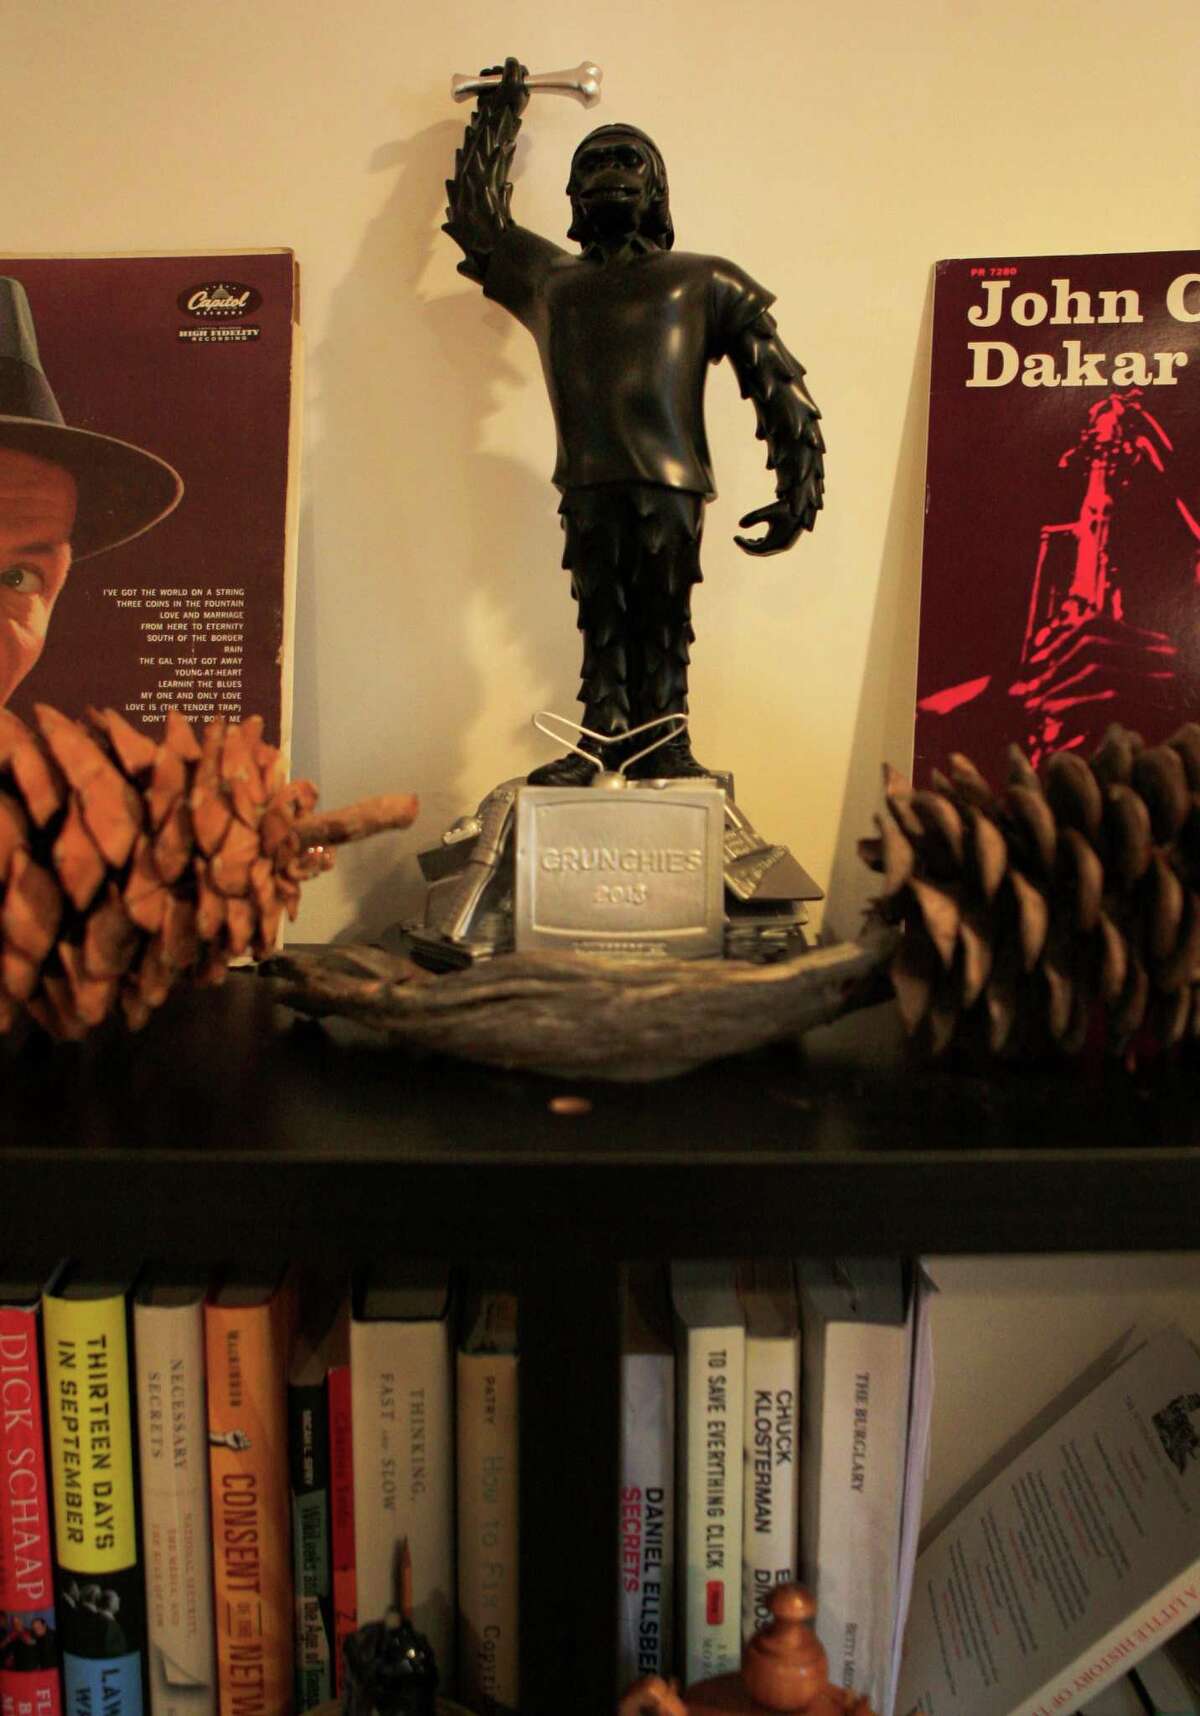 Edward Snowden's Crunchie award still sits in the apartment of Trevor Timm, head of the Freedom of the Press Institute in San Francisco. Timm accepted the award on Snowden's behalf. "I'm holding on to it for him until I can hand it over in person when he's allowed back in the US one day," Timm said.